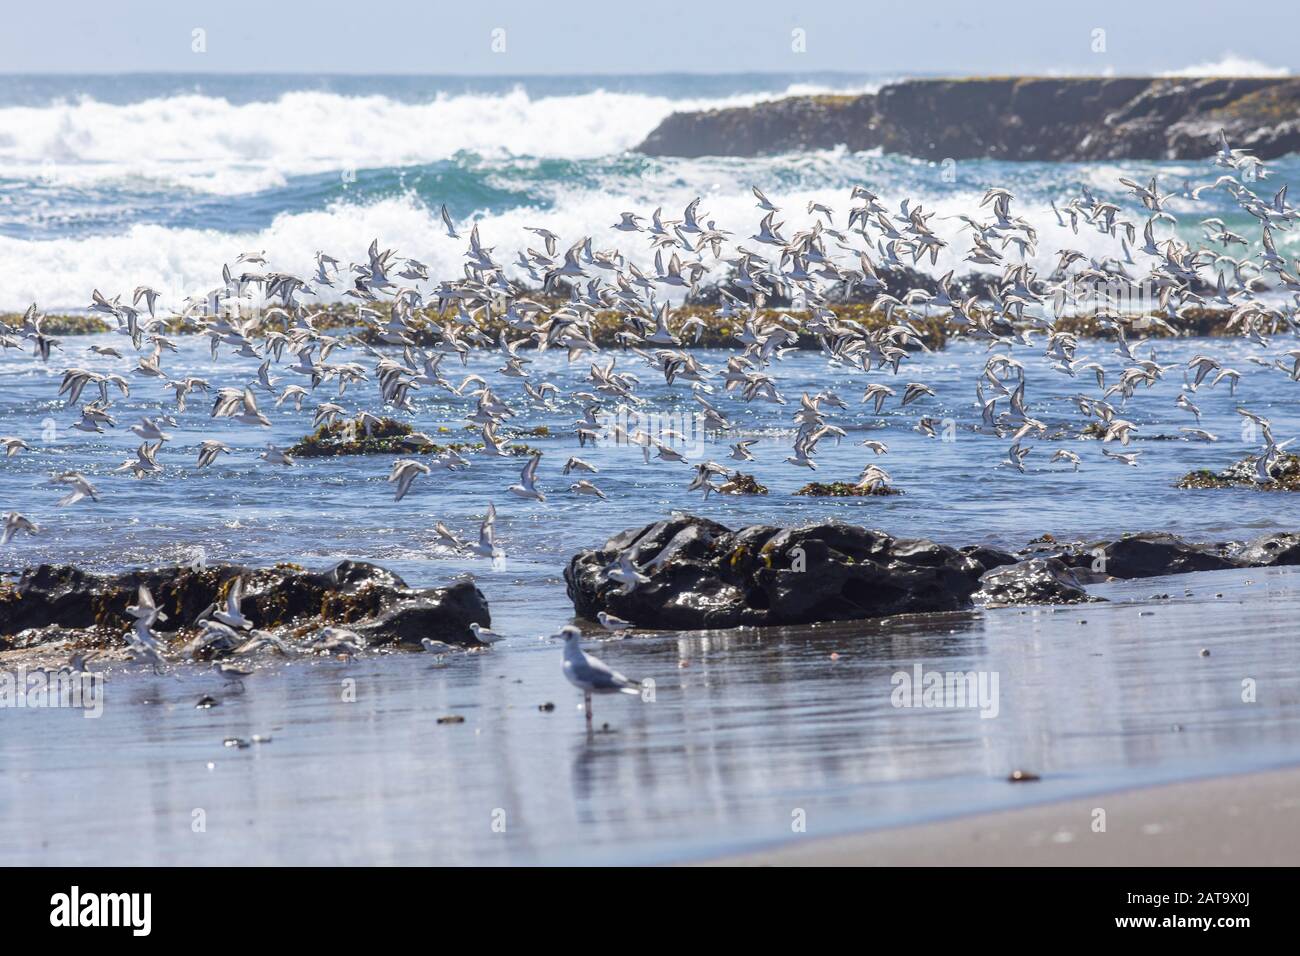 Thousands of birds flying at high speed in front of the sea at the Chilean coastline. An amazing flock of birds flying over the water and the beach Stock Photo